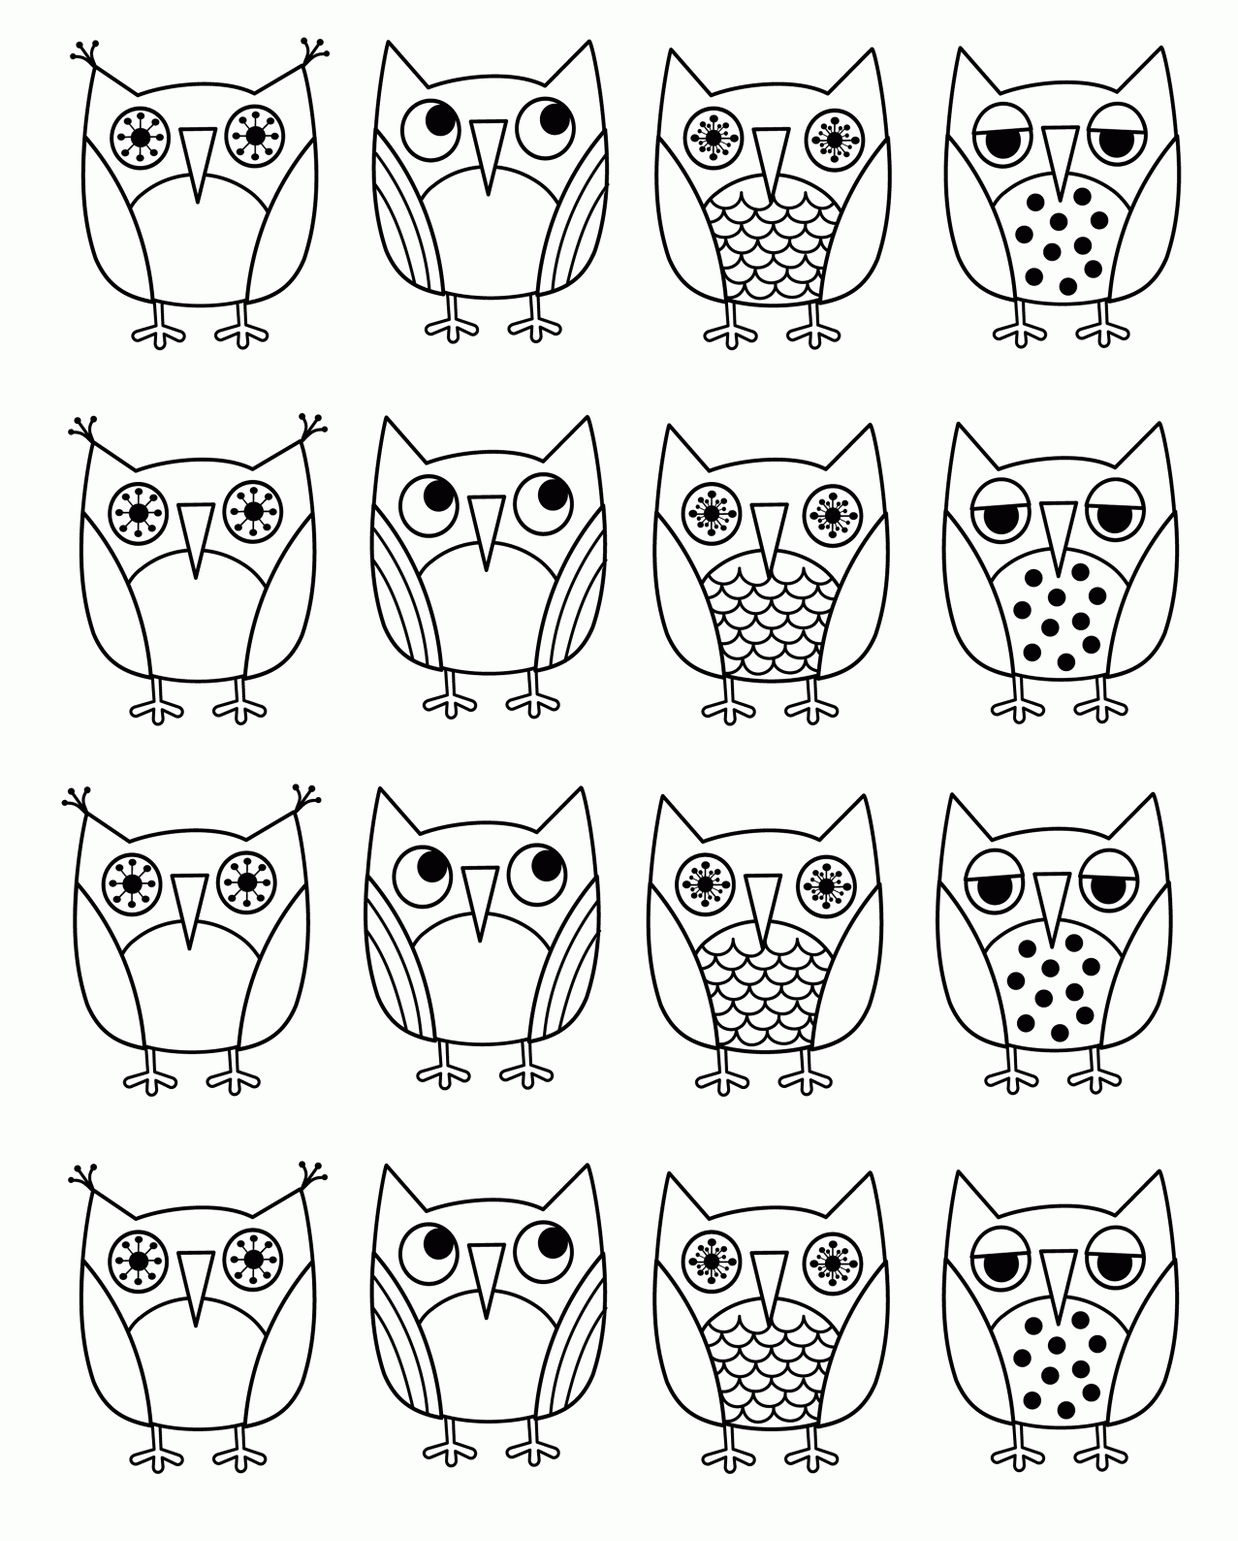 Shape Cartoon Owl Coloring Page Free Printable Coloring Pages ...